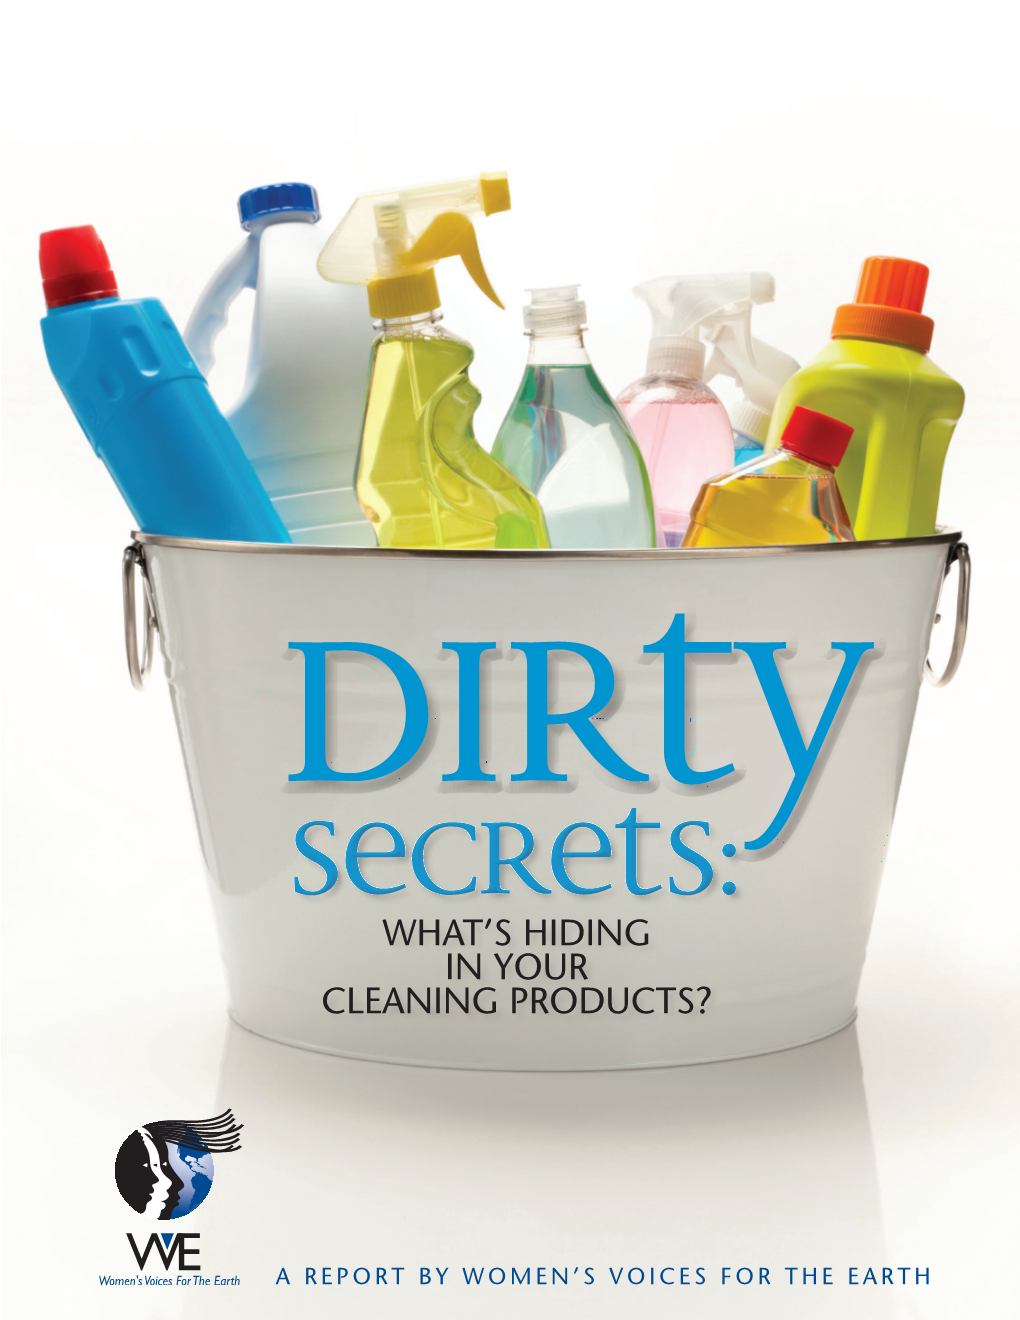 DIRTY SECRETS: What's Hiding in Your Cleaning Products?